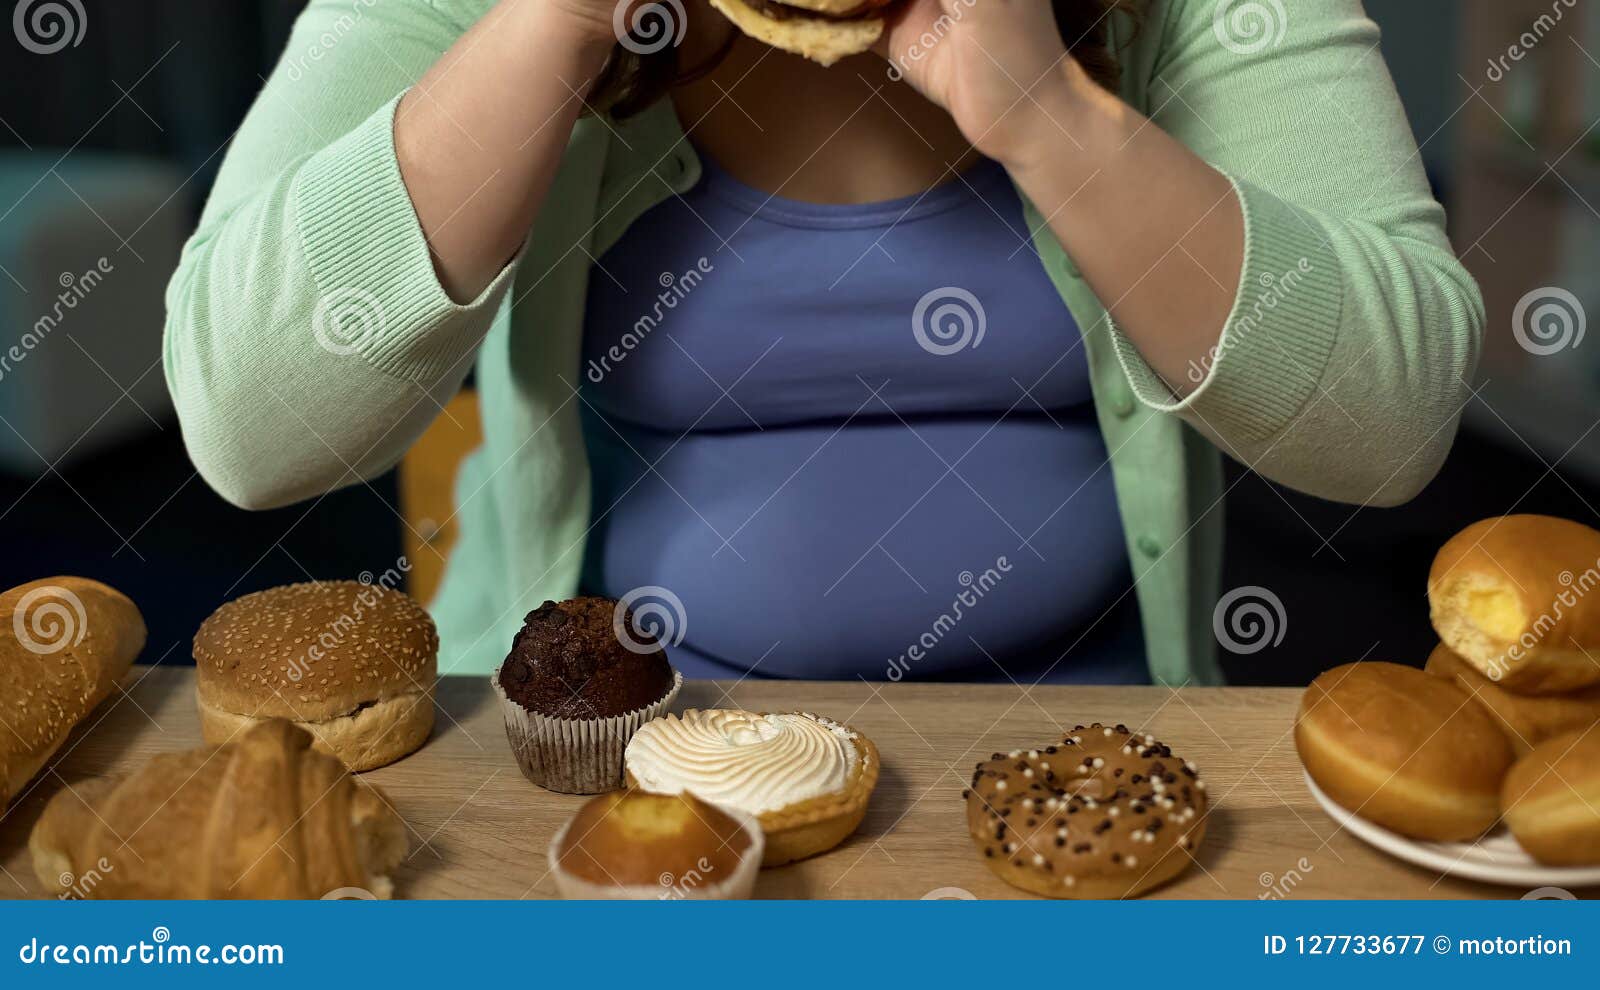 overweight woman consuming too much bakery, eating stress with unhealthy sweets